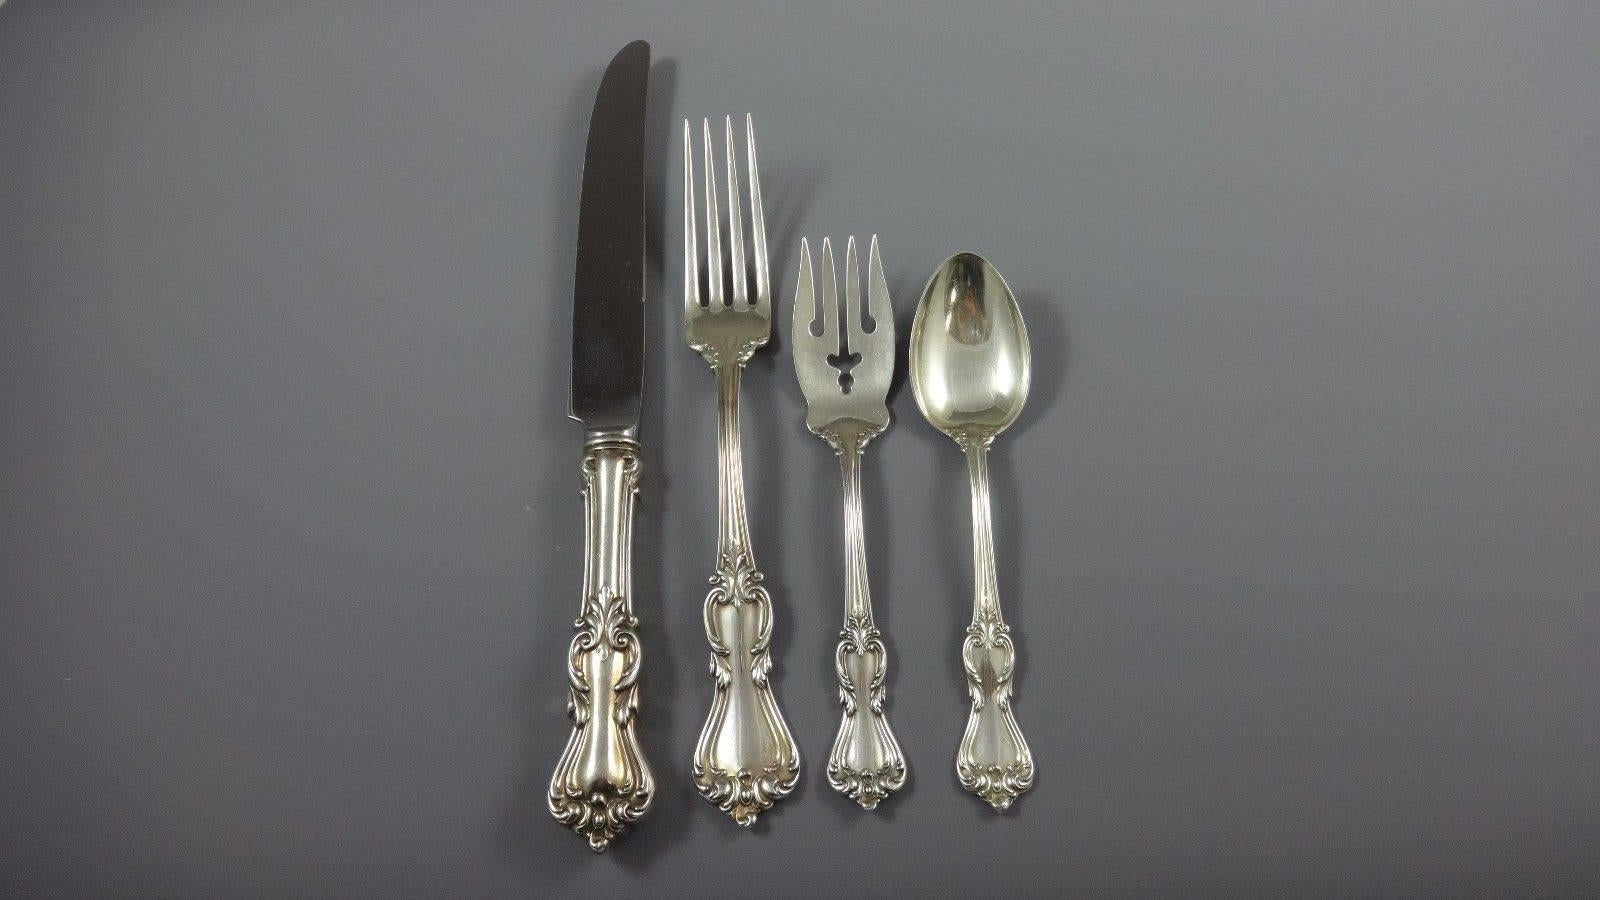 Monumental Marlborough by Reed & Barton dinner and luncheon sterling silver flatware set for 12 - 132 pieces. This set includes:

12 dinner size knives, 9 3/4